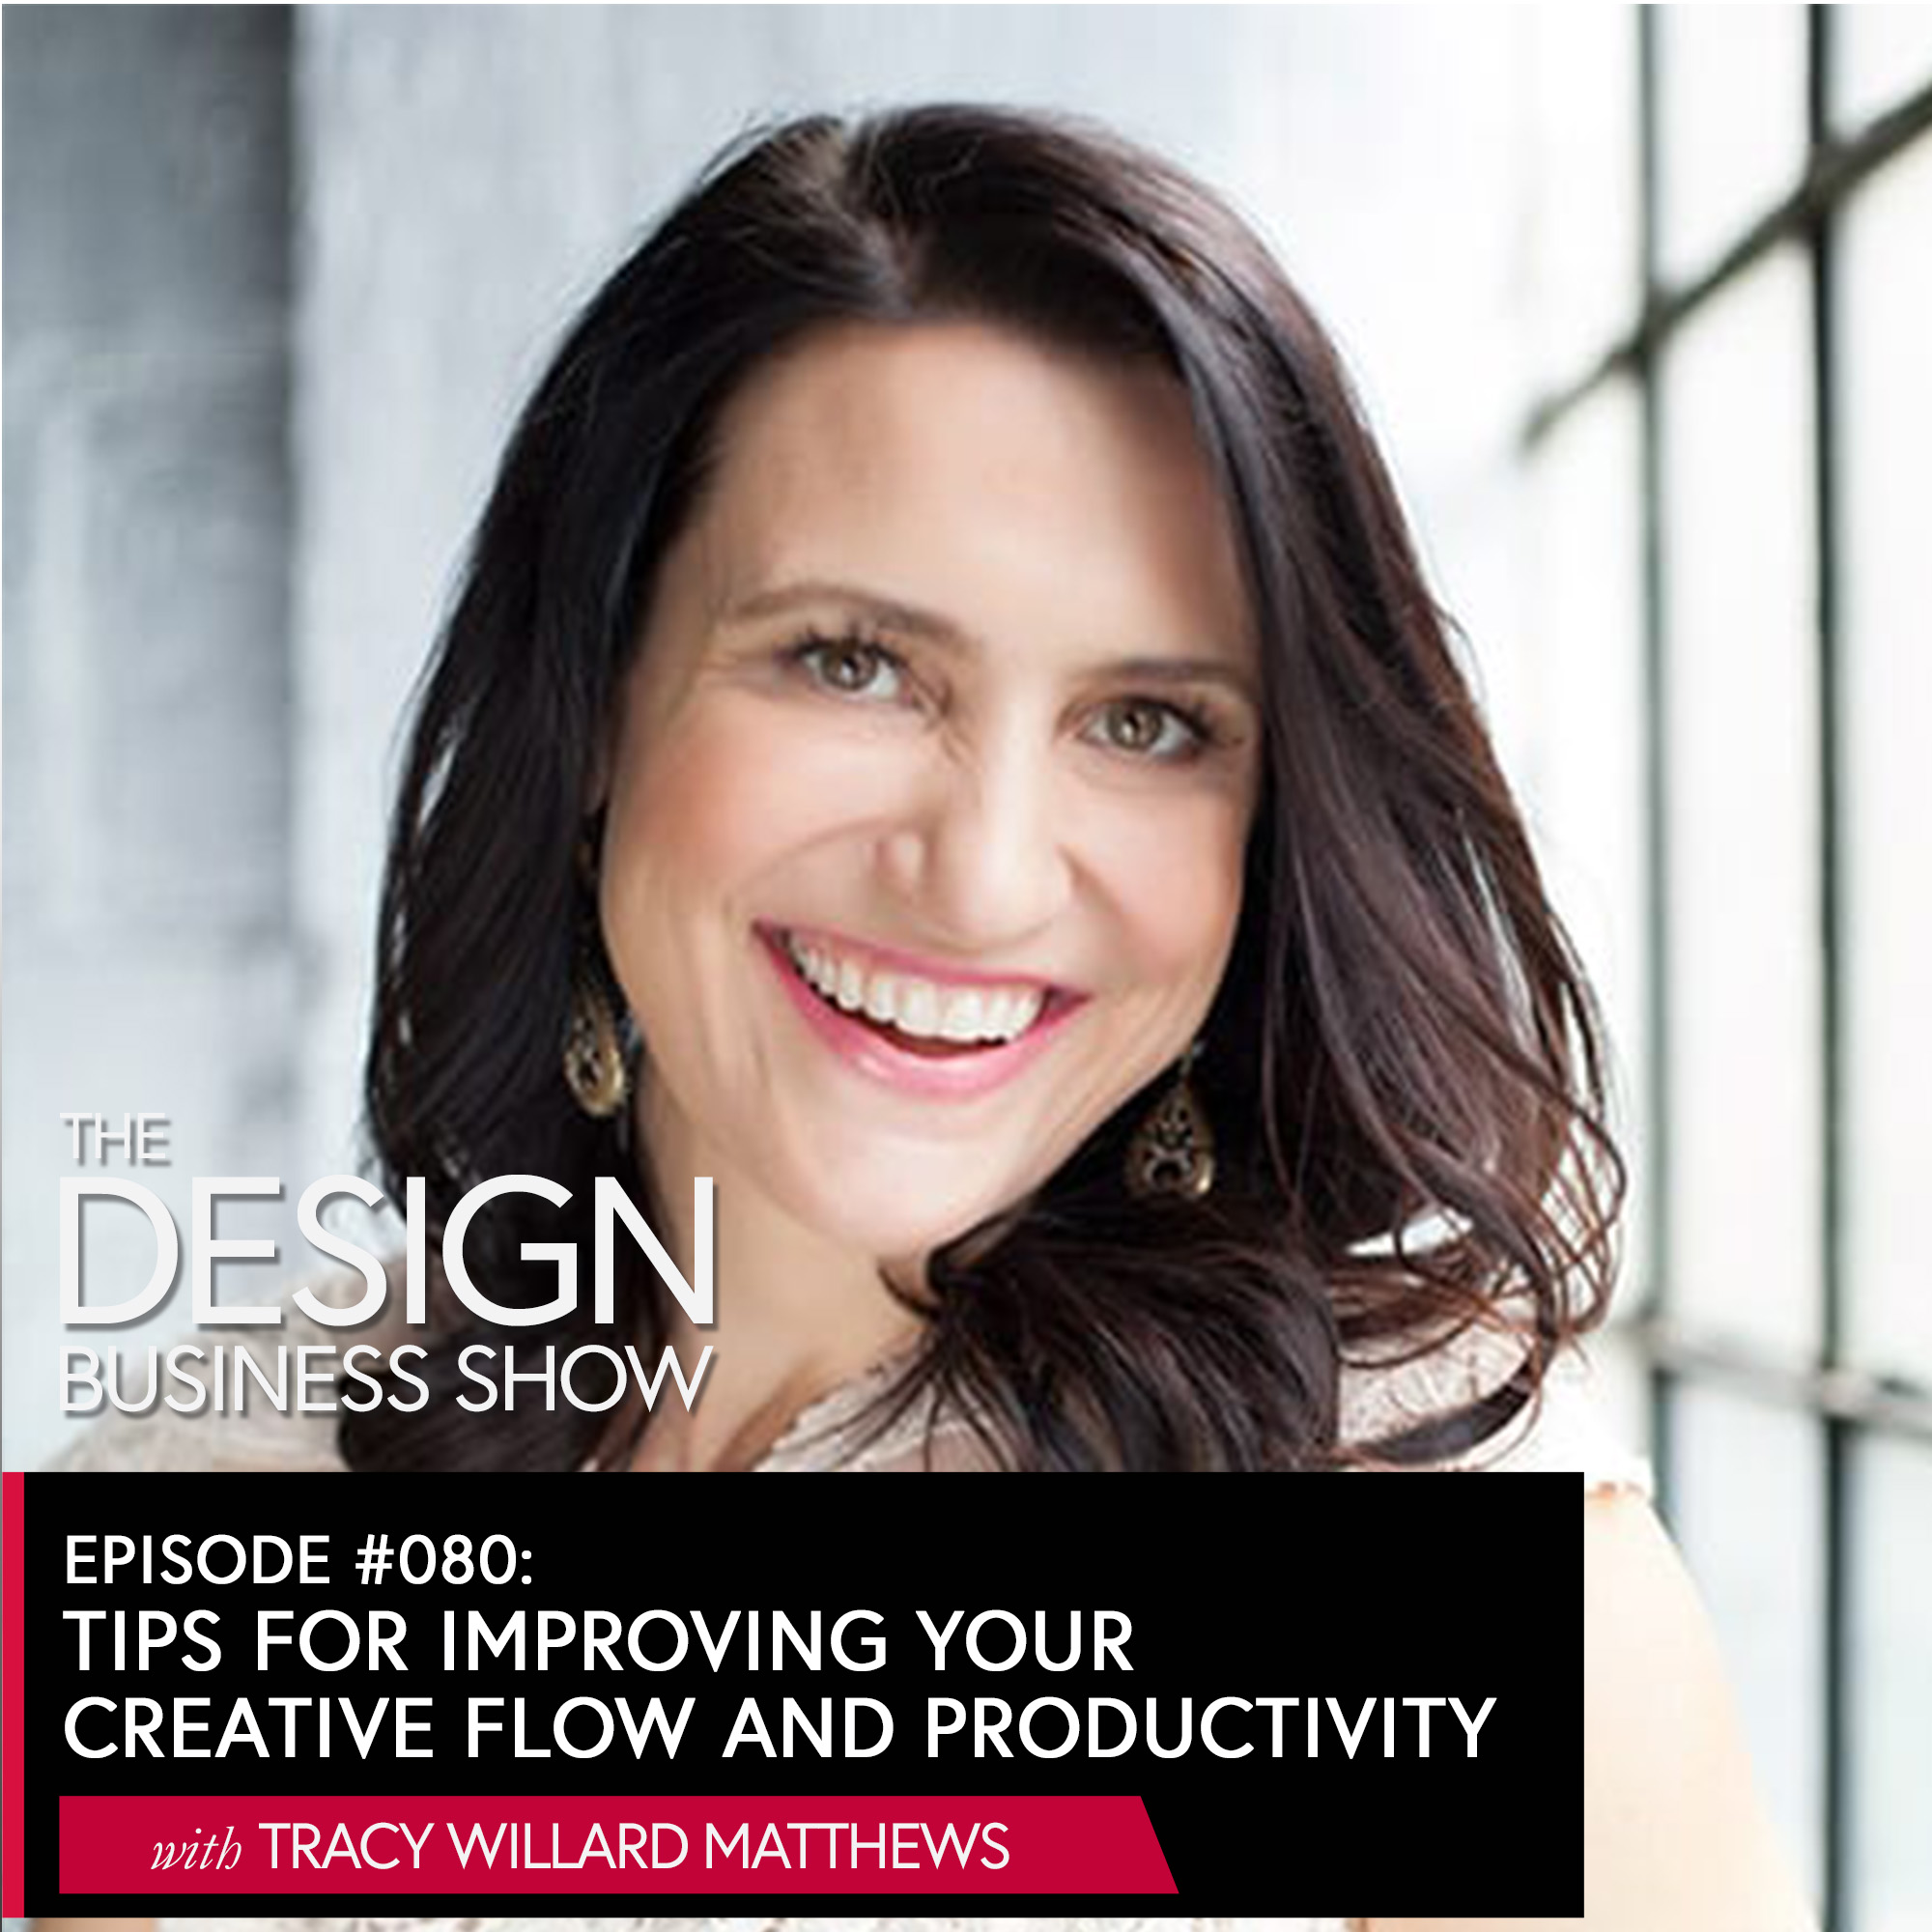 Check out episode 80 of The Design Business Show to learn how you can use creativity to help you thrive in your business!